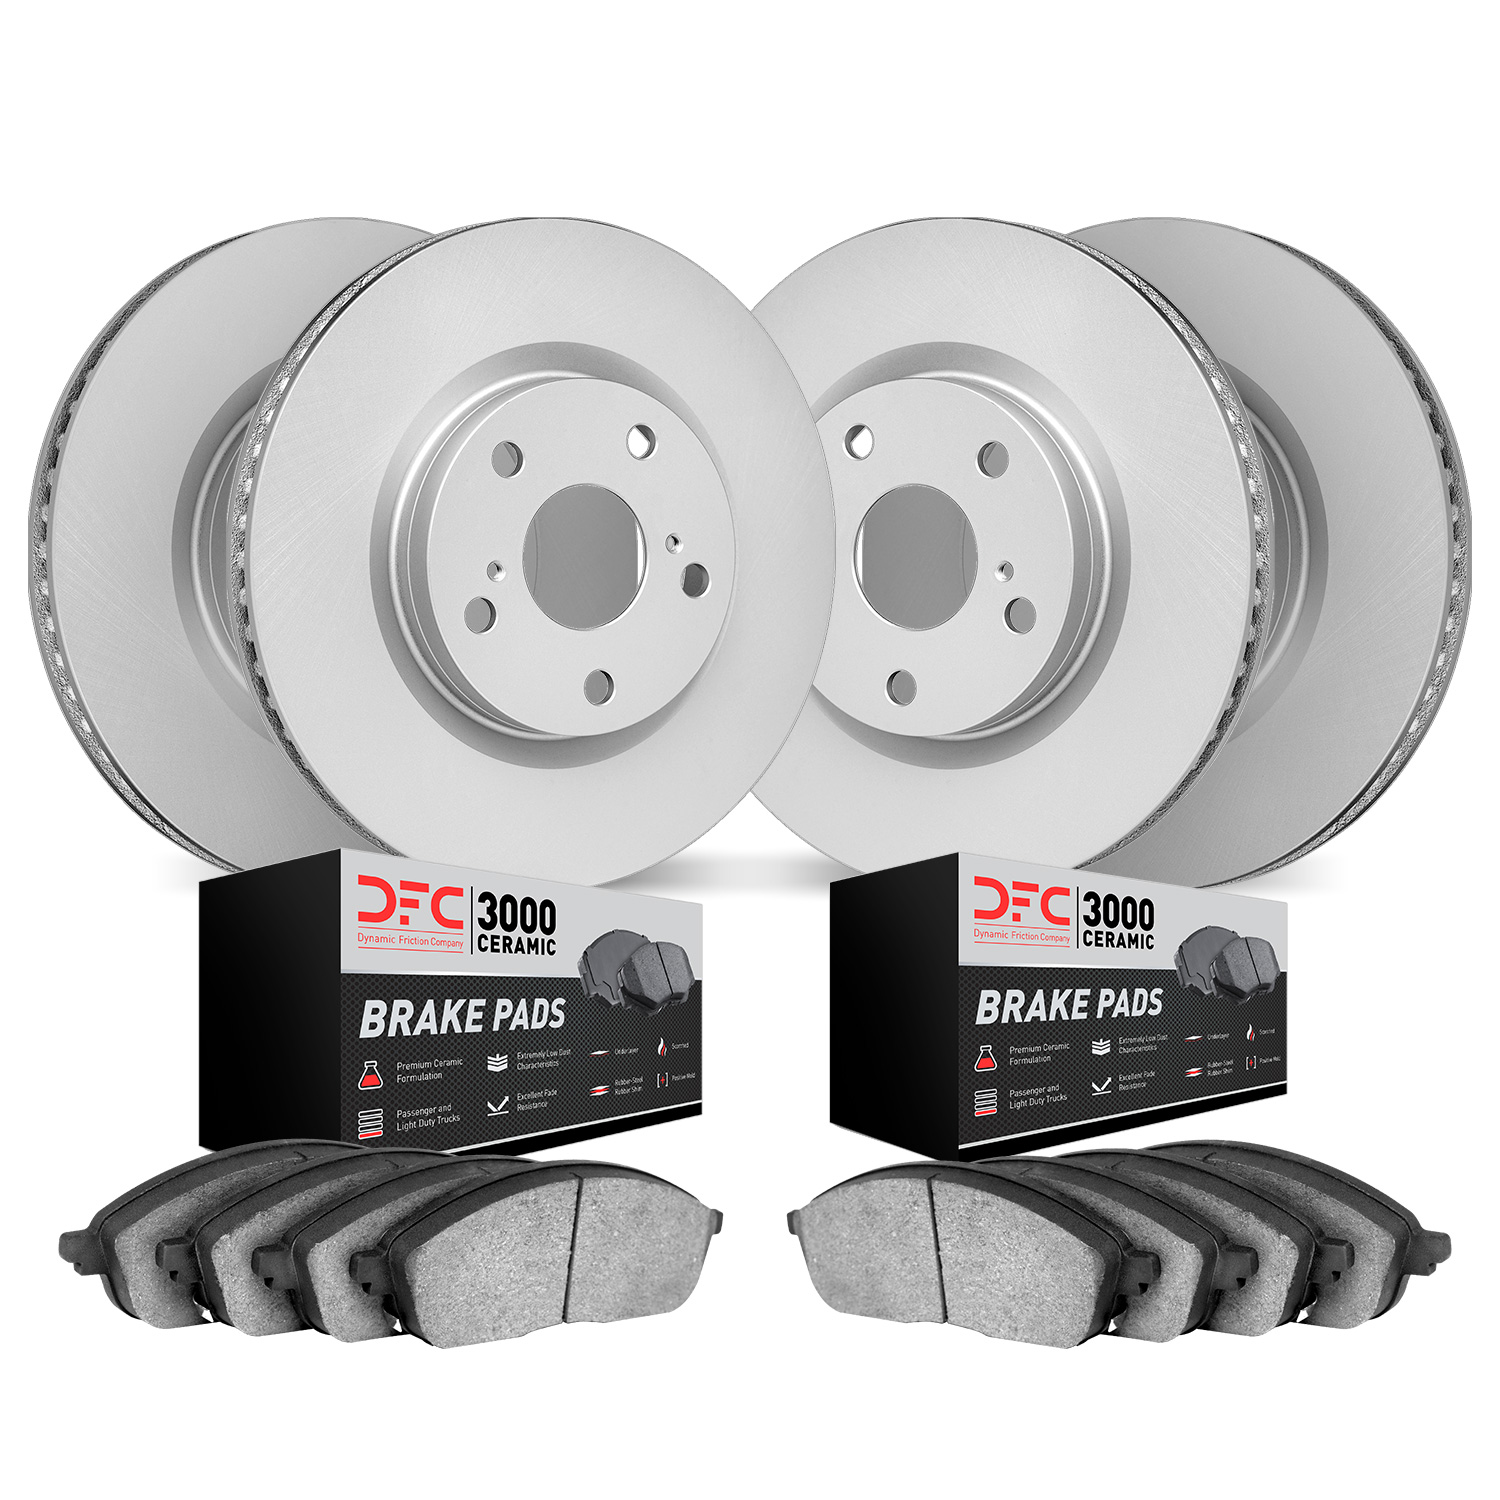 4304-02006 Geospec Brake Rotors with 3000-Series Ceramic Brake Pads Kit, 1997-2004 Porsche, Position: Front and Rear